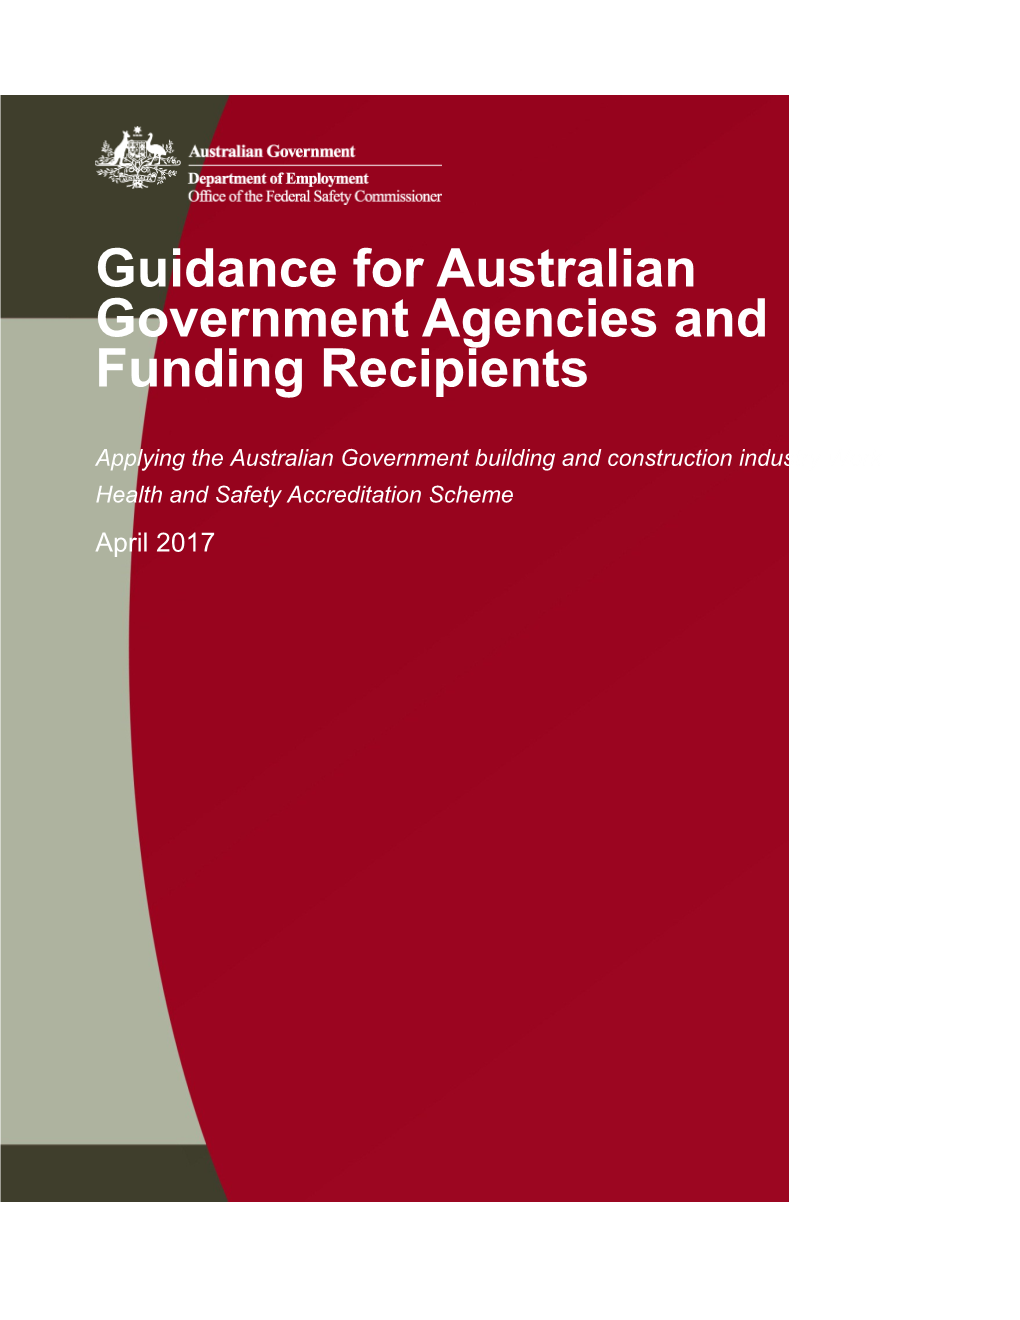 Guidance for Australian Government Agencies and Funding Recipients